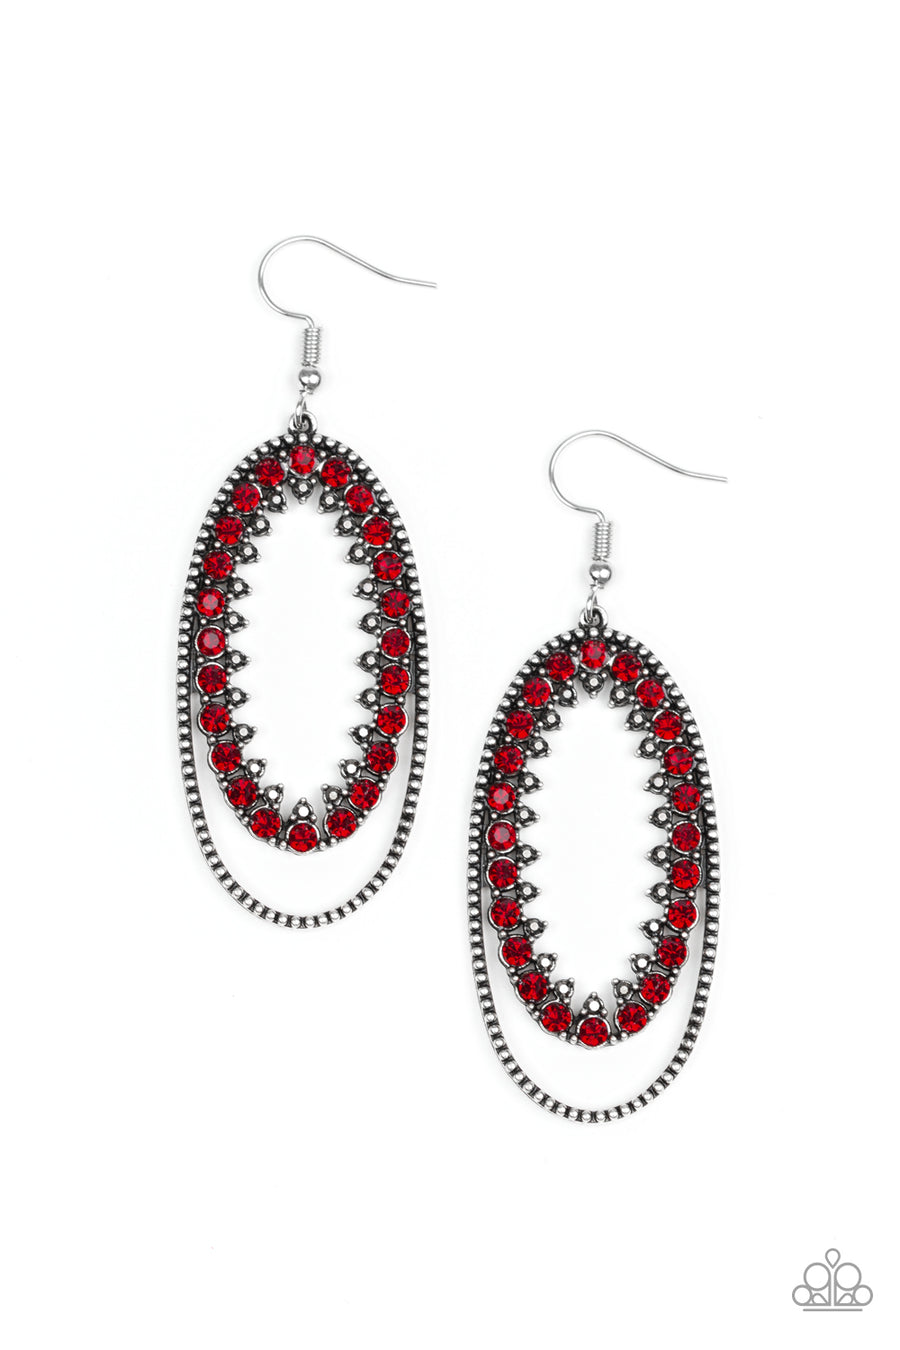 Mary Into Money - Red Rhinestone Earrings  - Paparazzi Accessories